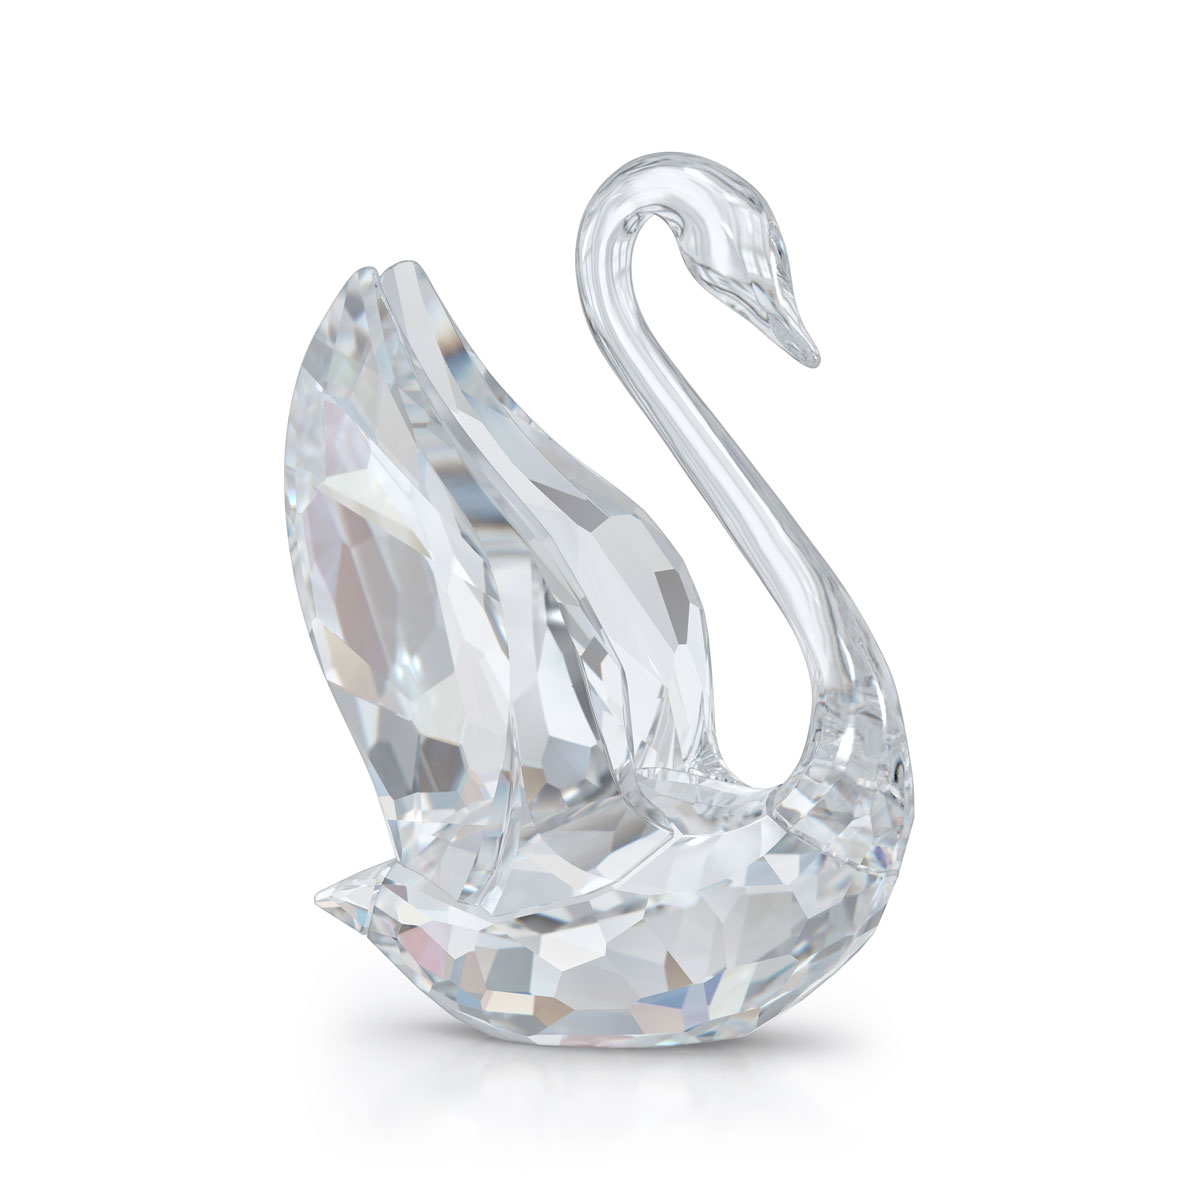 Swarovski Nature Collections Iconic Swan Small